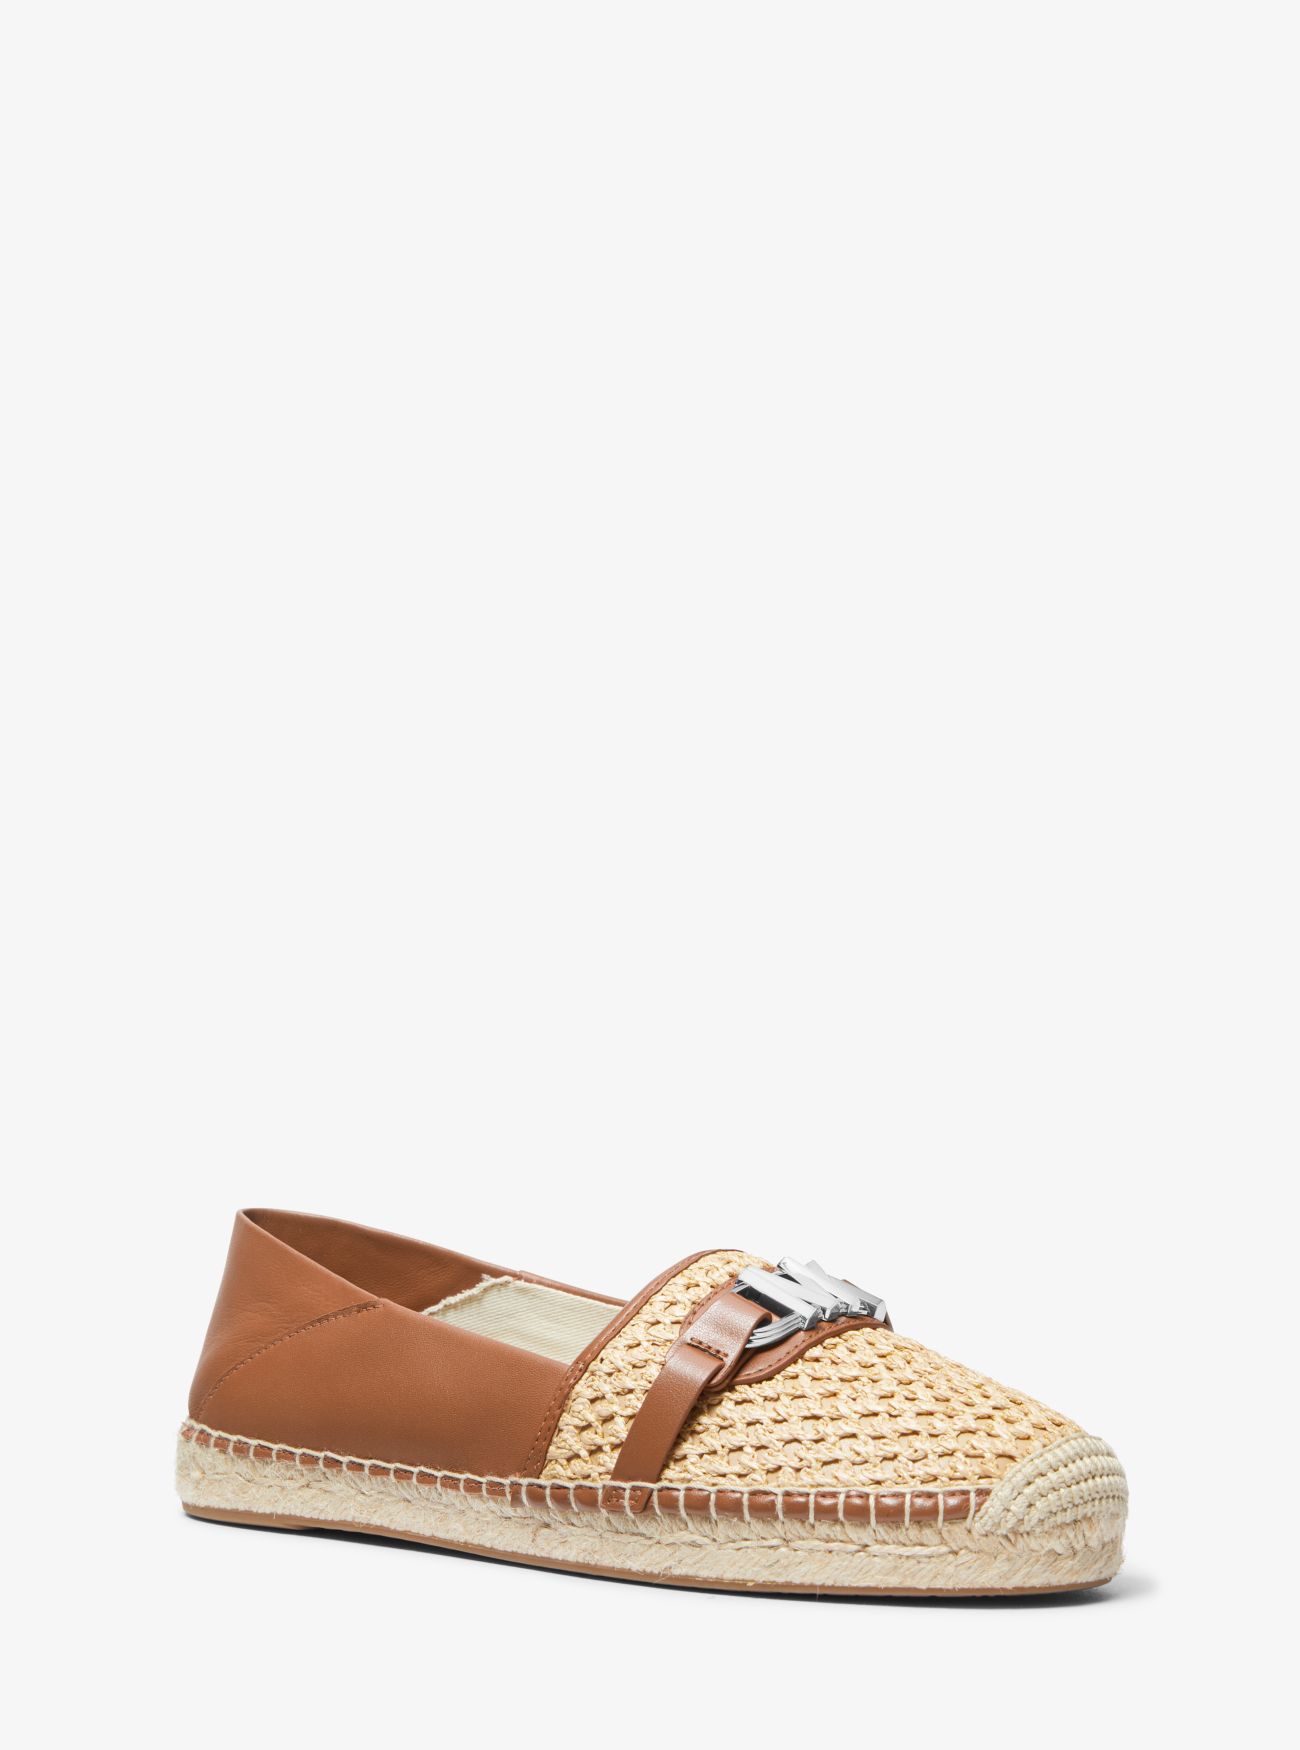 MK Ember Leather and Straw Espadrille - Brown - Michael Kors